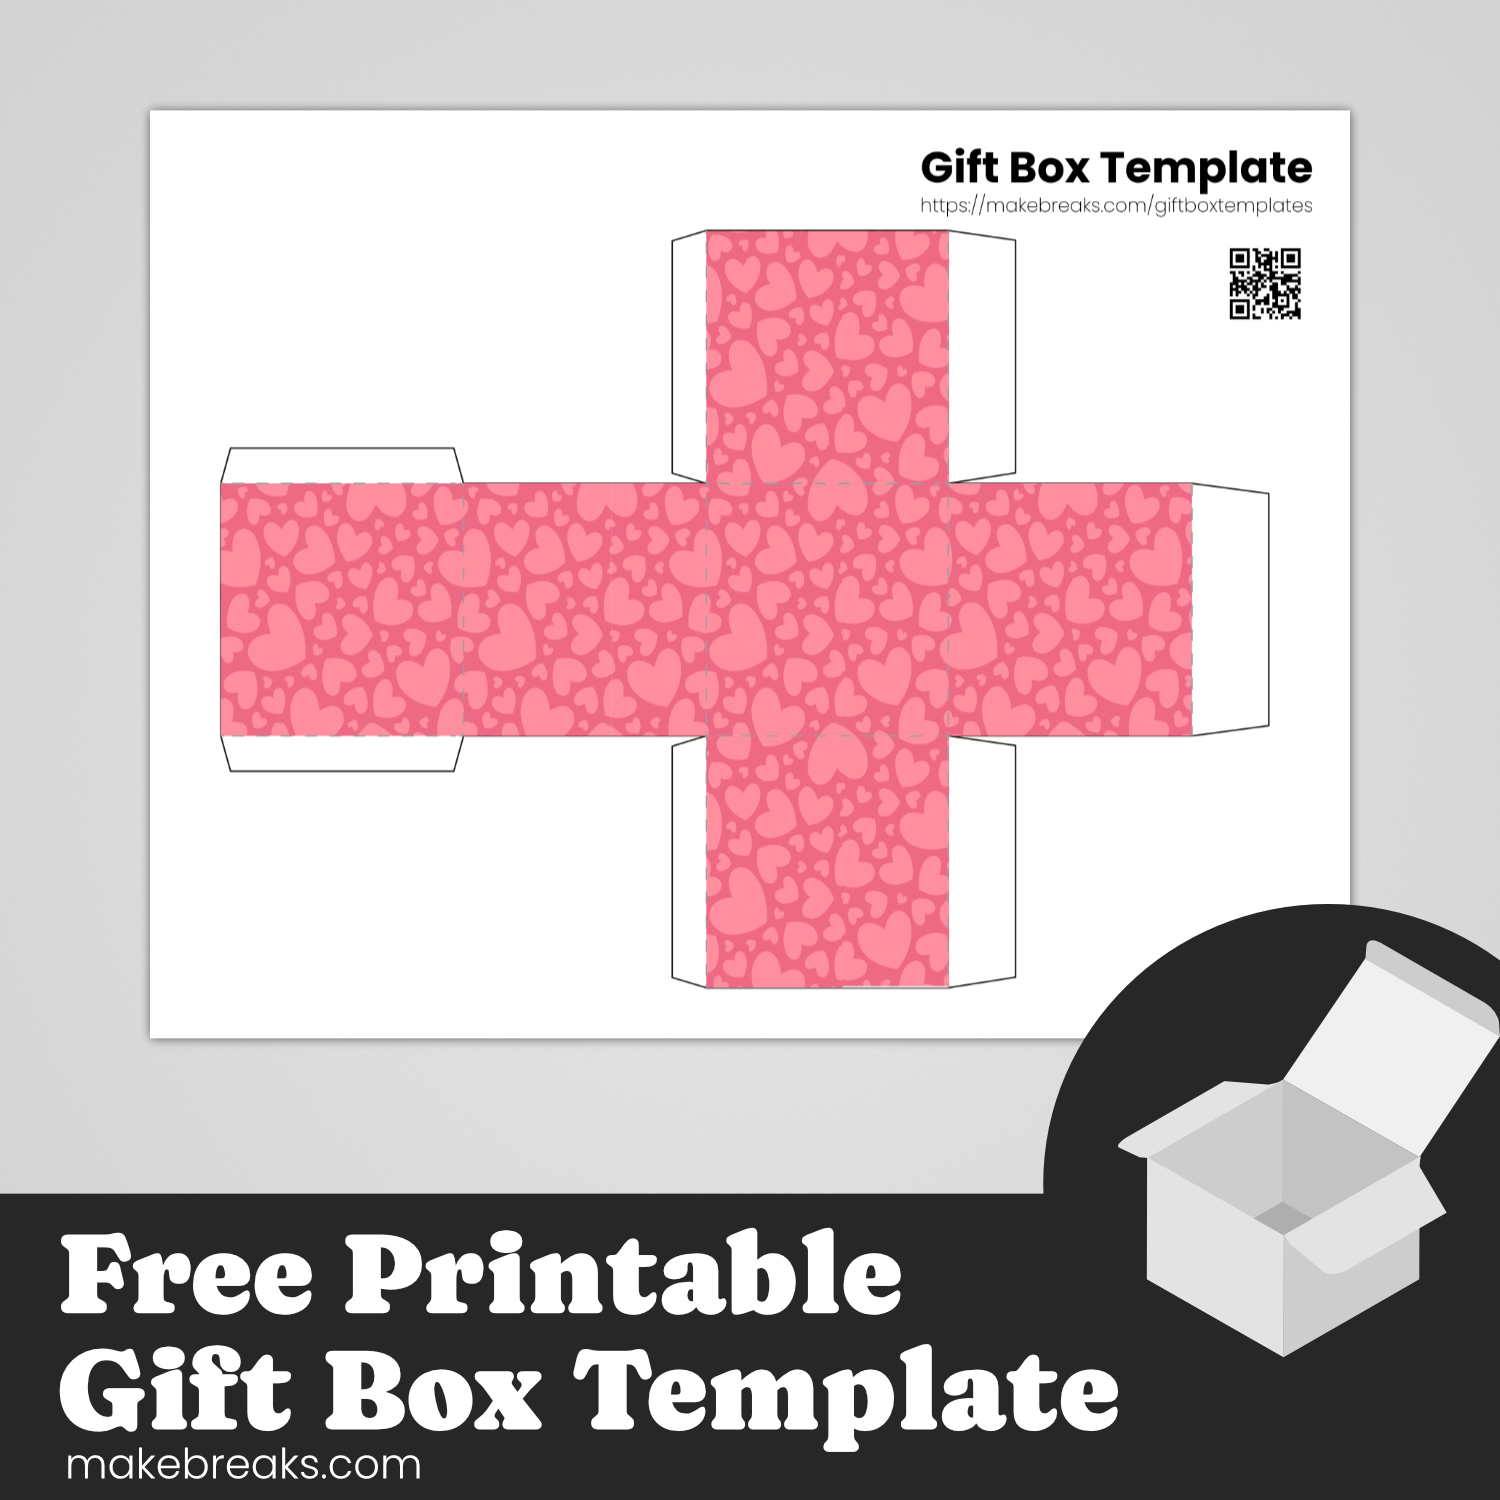 Free Printable Gift Box With Heart Design